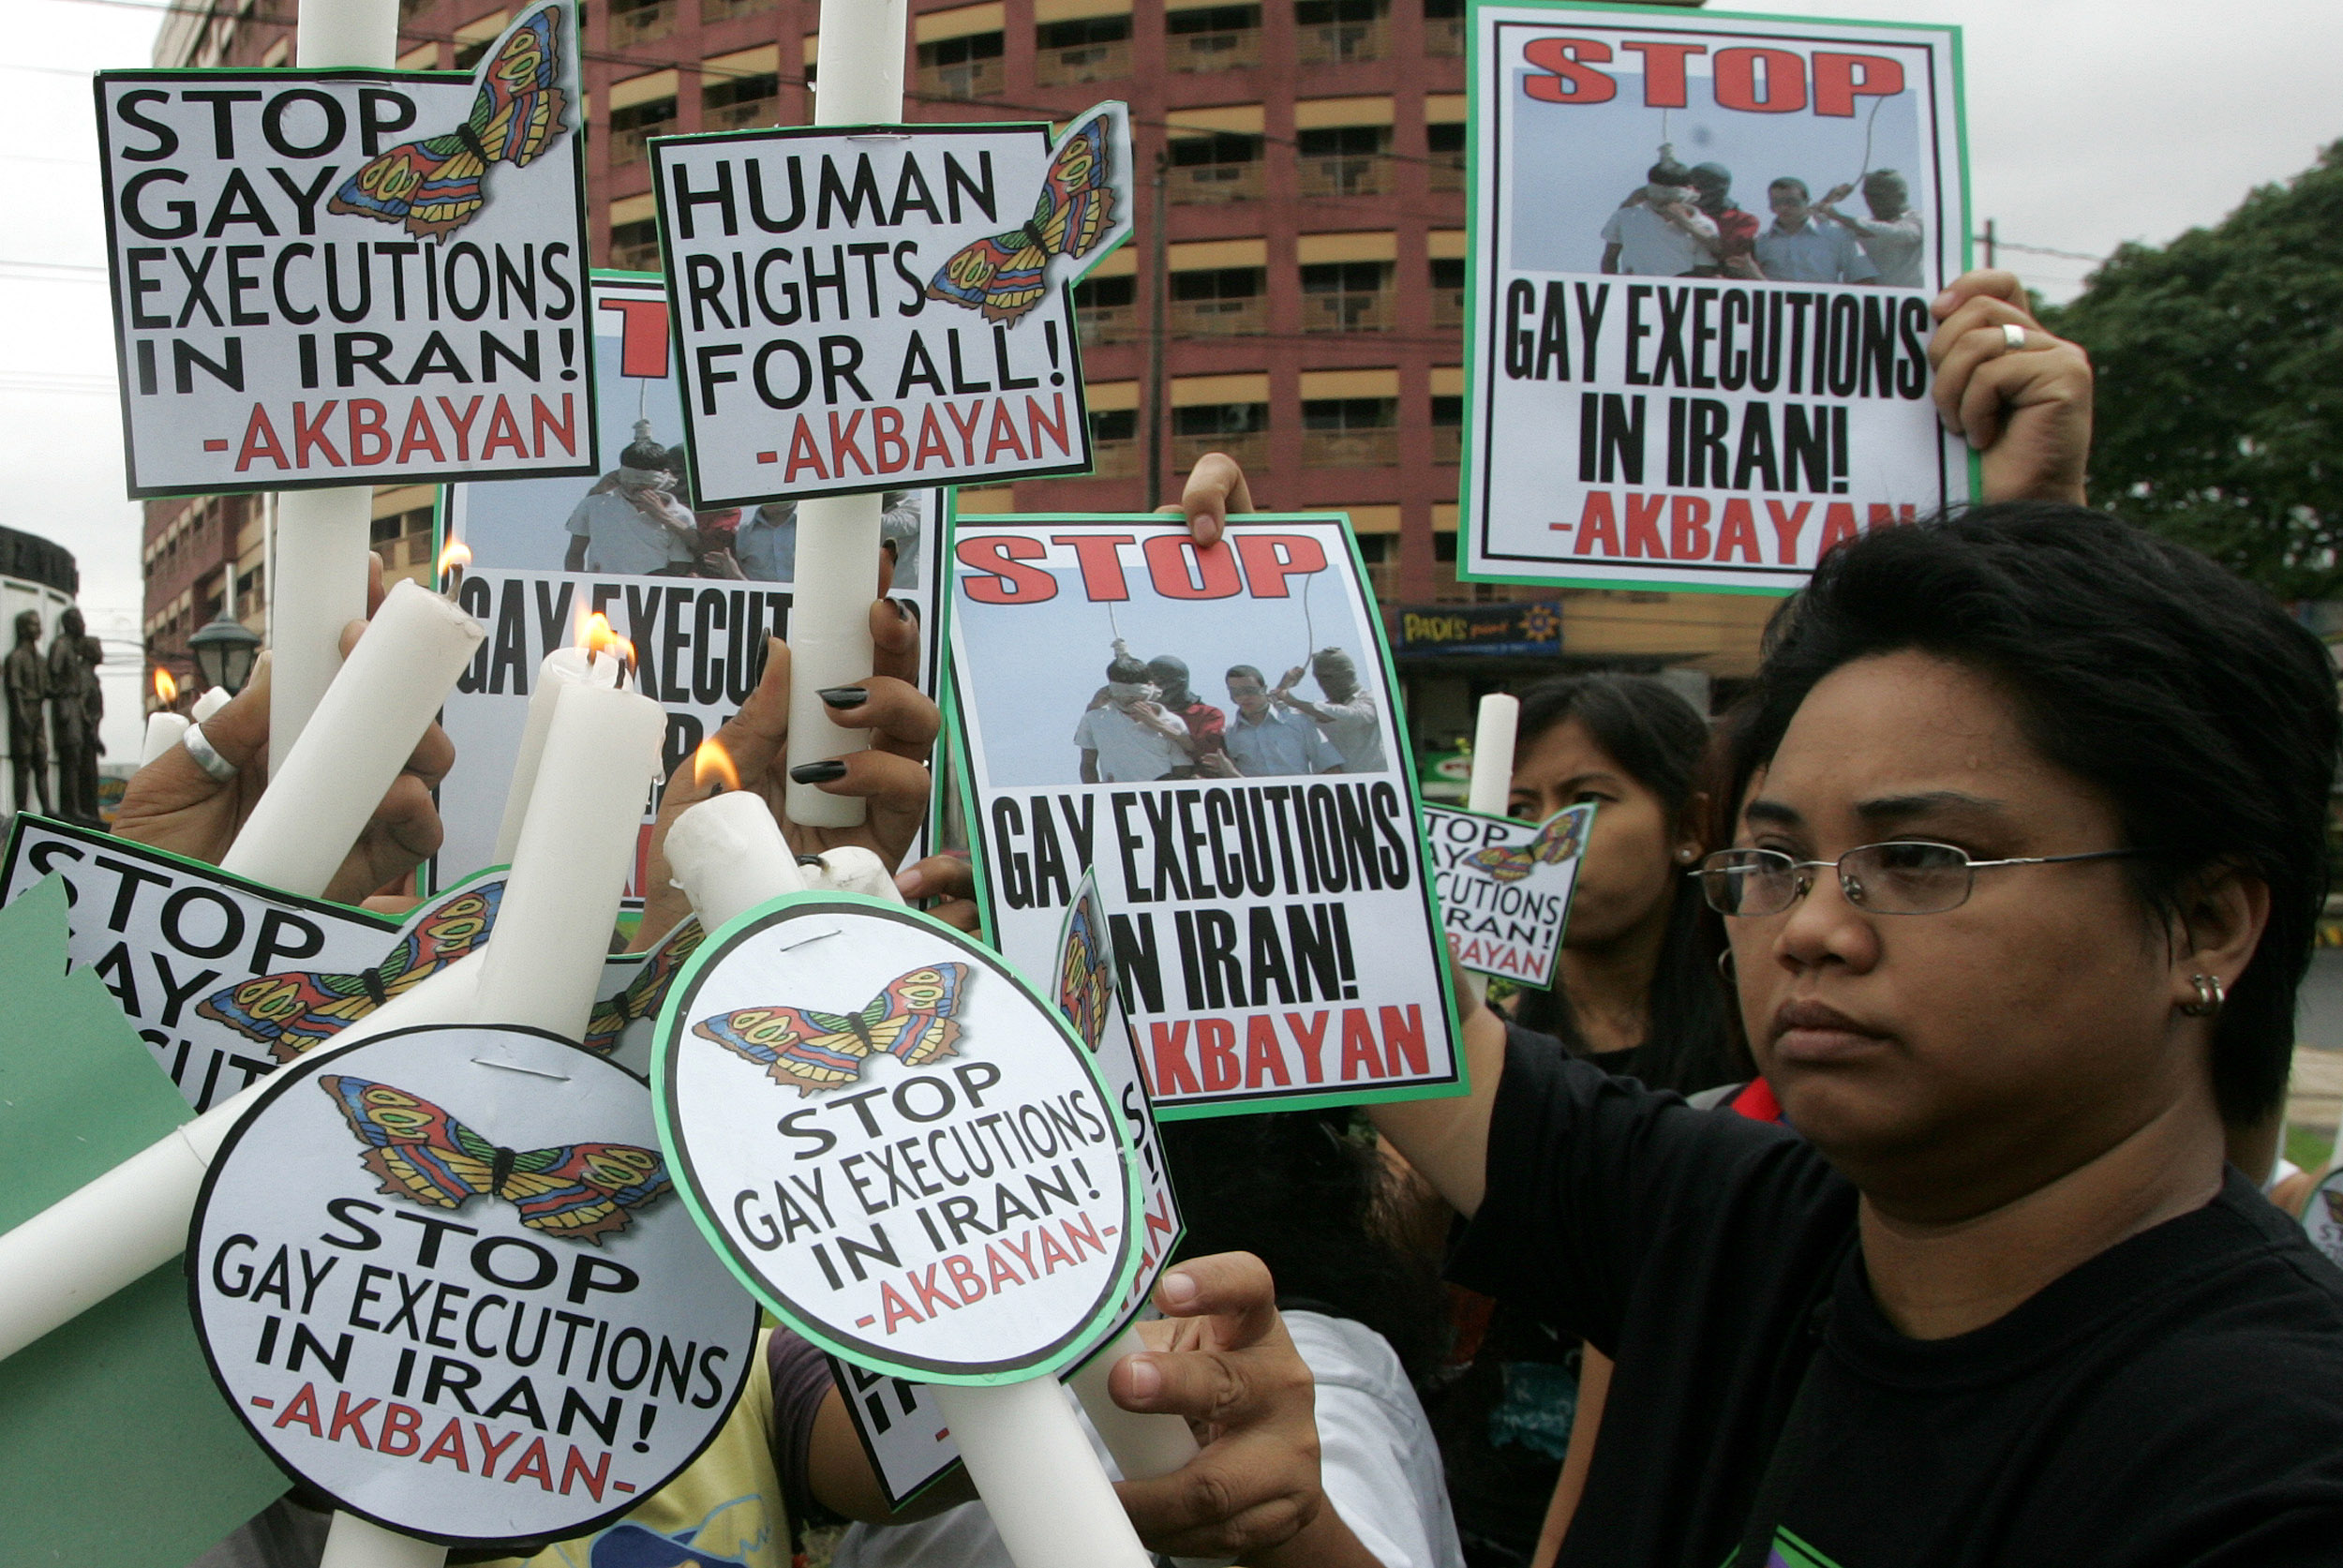 Philippine protesters denounce the reported hanging of two homosexual teenagers in Iran during a protest in Quezon city. Philippine protesters hold candles and placards to denounce the reported hanging of two homosexual teenage boys in Iran during a protest in Quezon city, suburban Manila, August 5, 2005. REUTERS/Romeo Ranoco